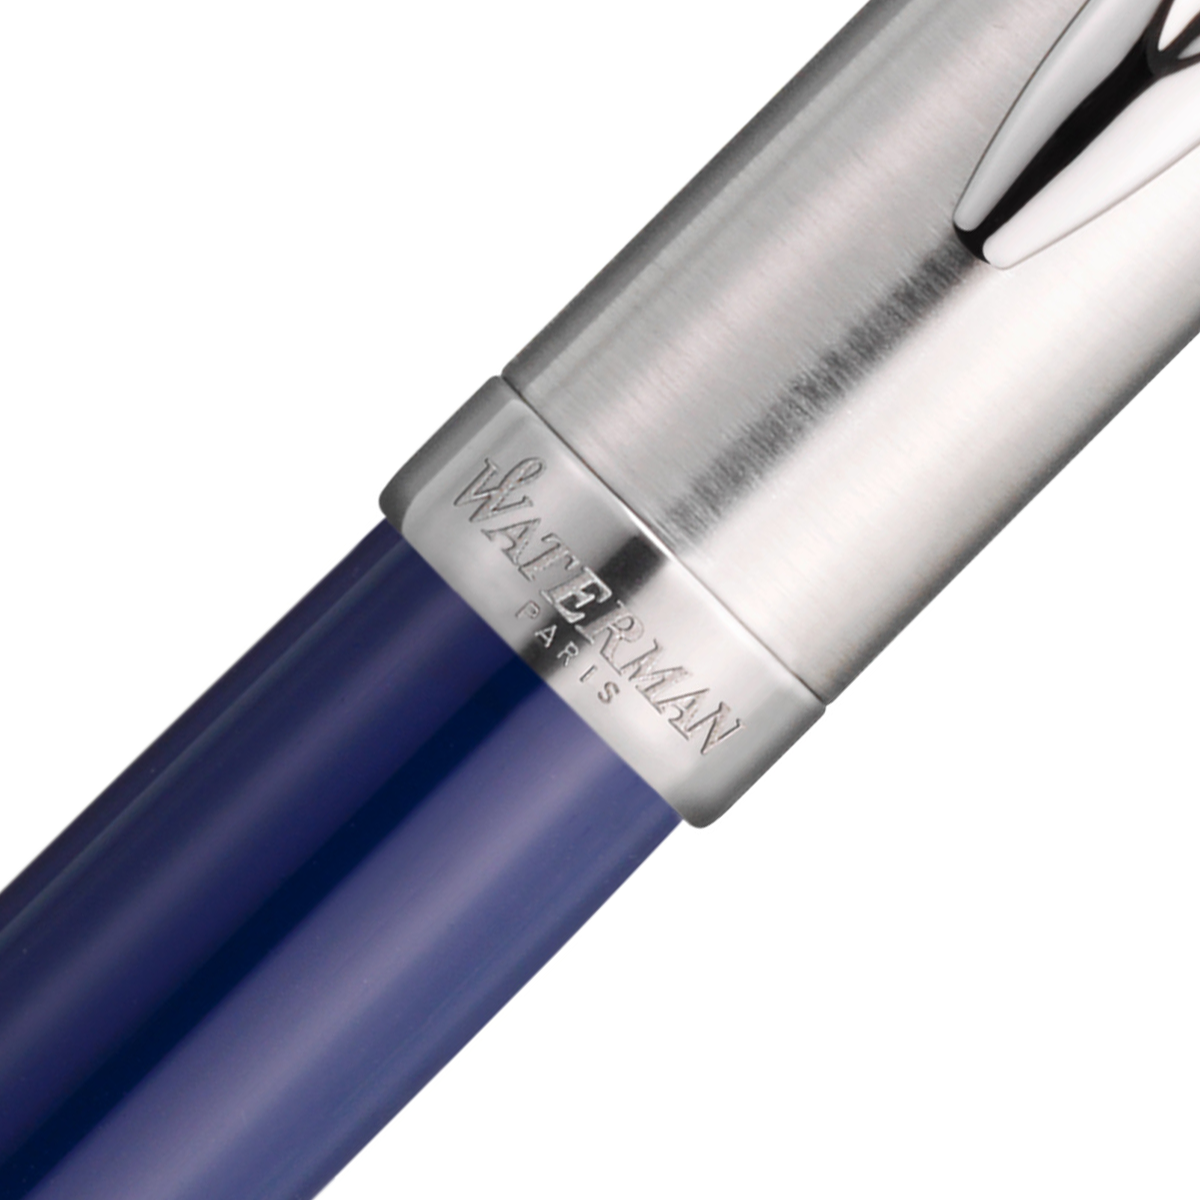 Emblème Blue/Chrome Rollerball in the group Pens / Fine Writing / Rollerball Pens at Pen Store (128050)